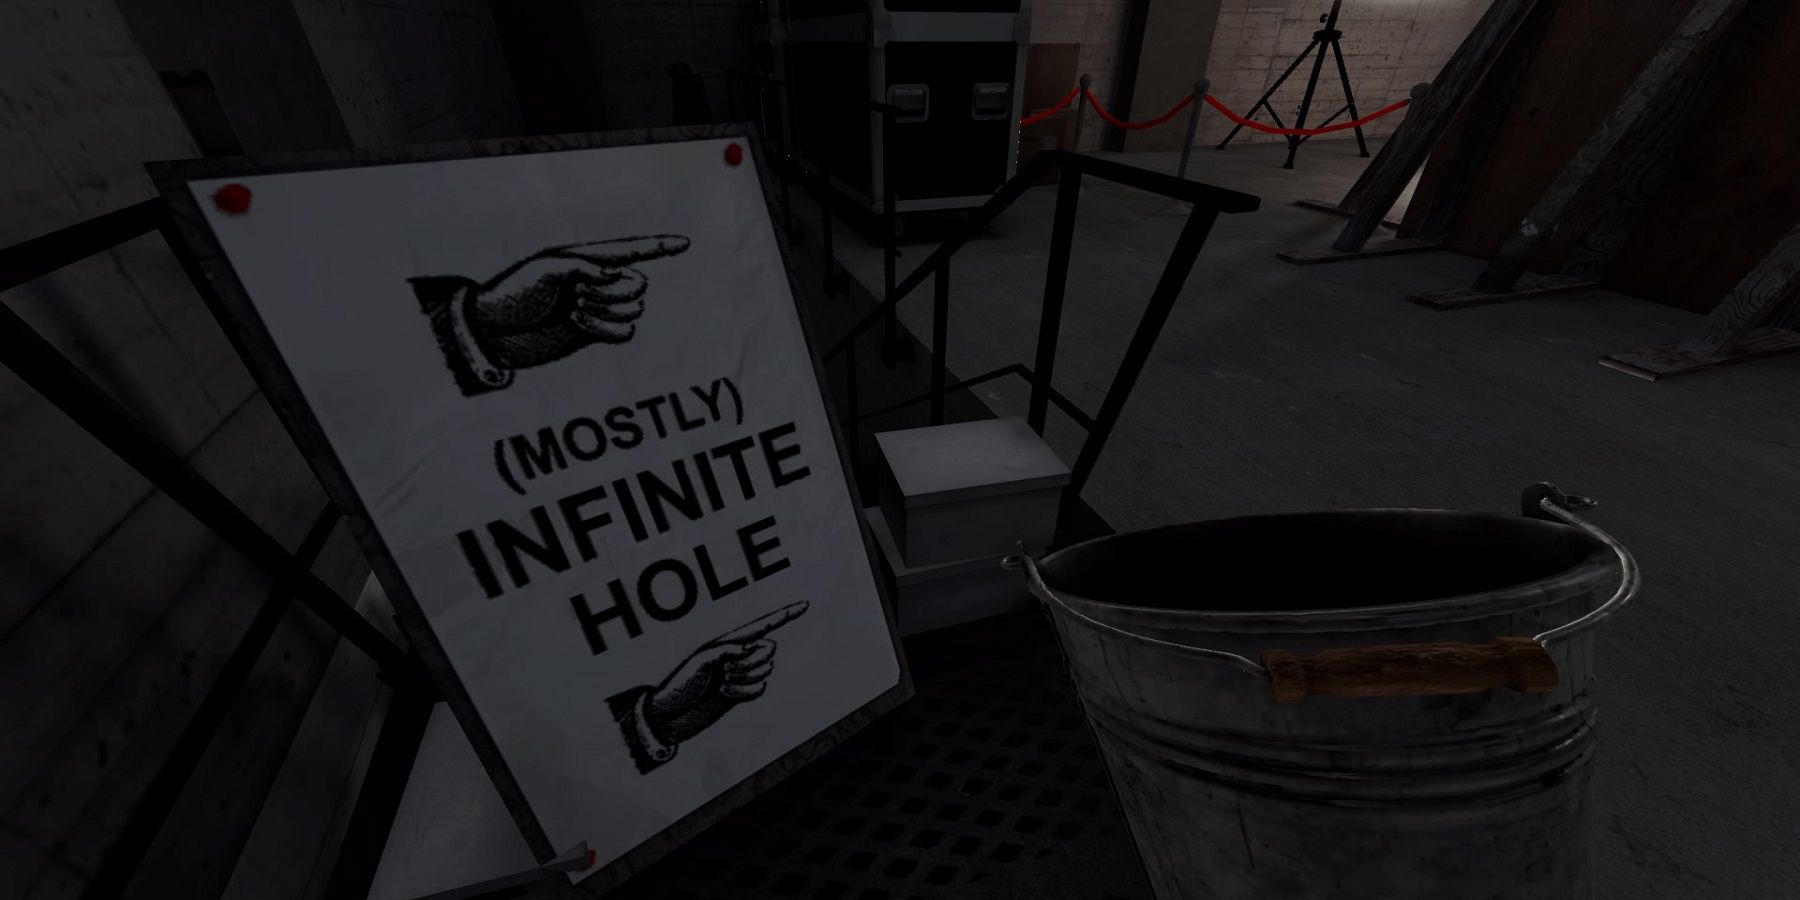 The Stanley Parable - Ultra Deluxe Mostly Infinite Hole